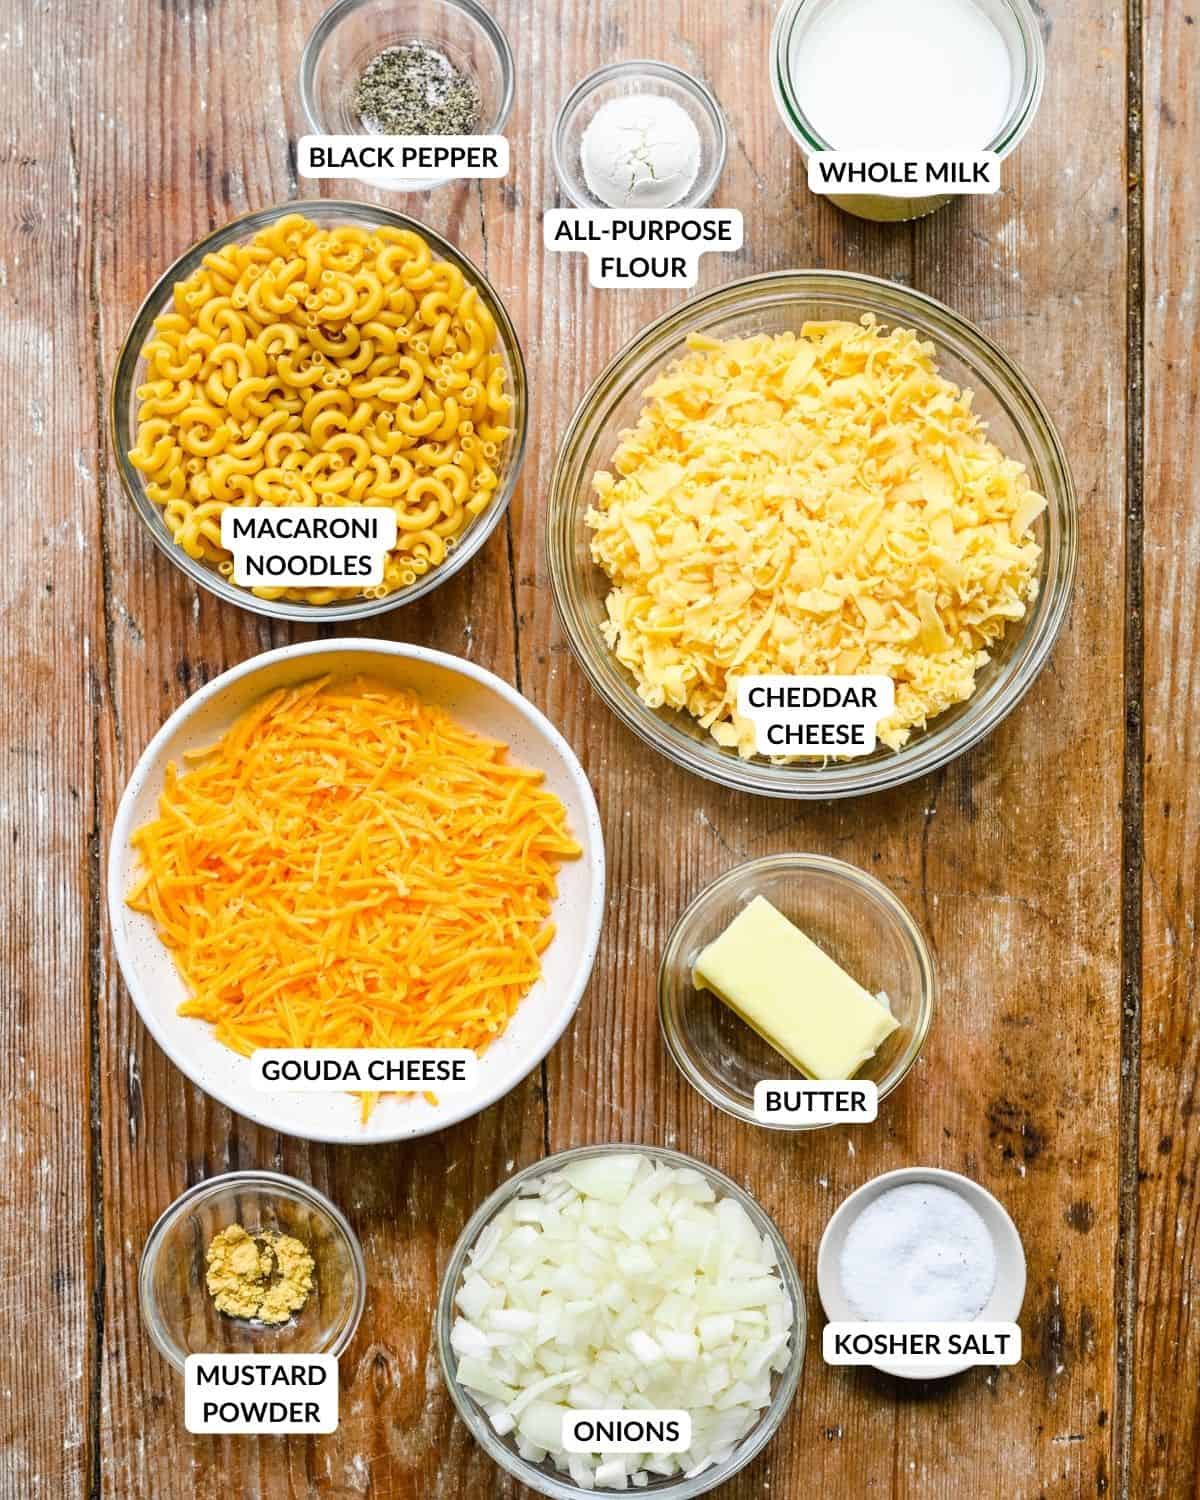 Labeled ingredient list for gouda mac and cheese - check recipe card for details!